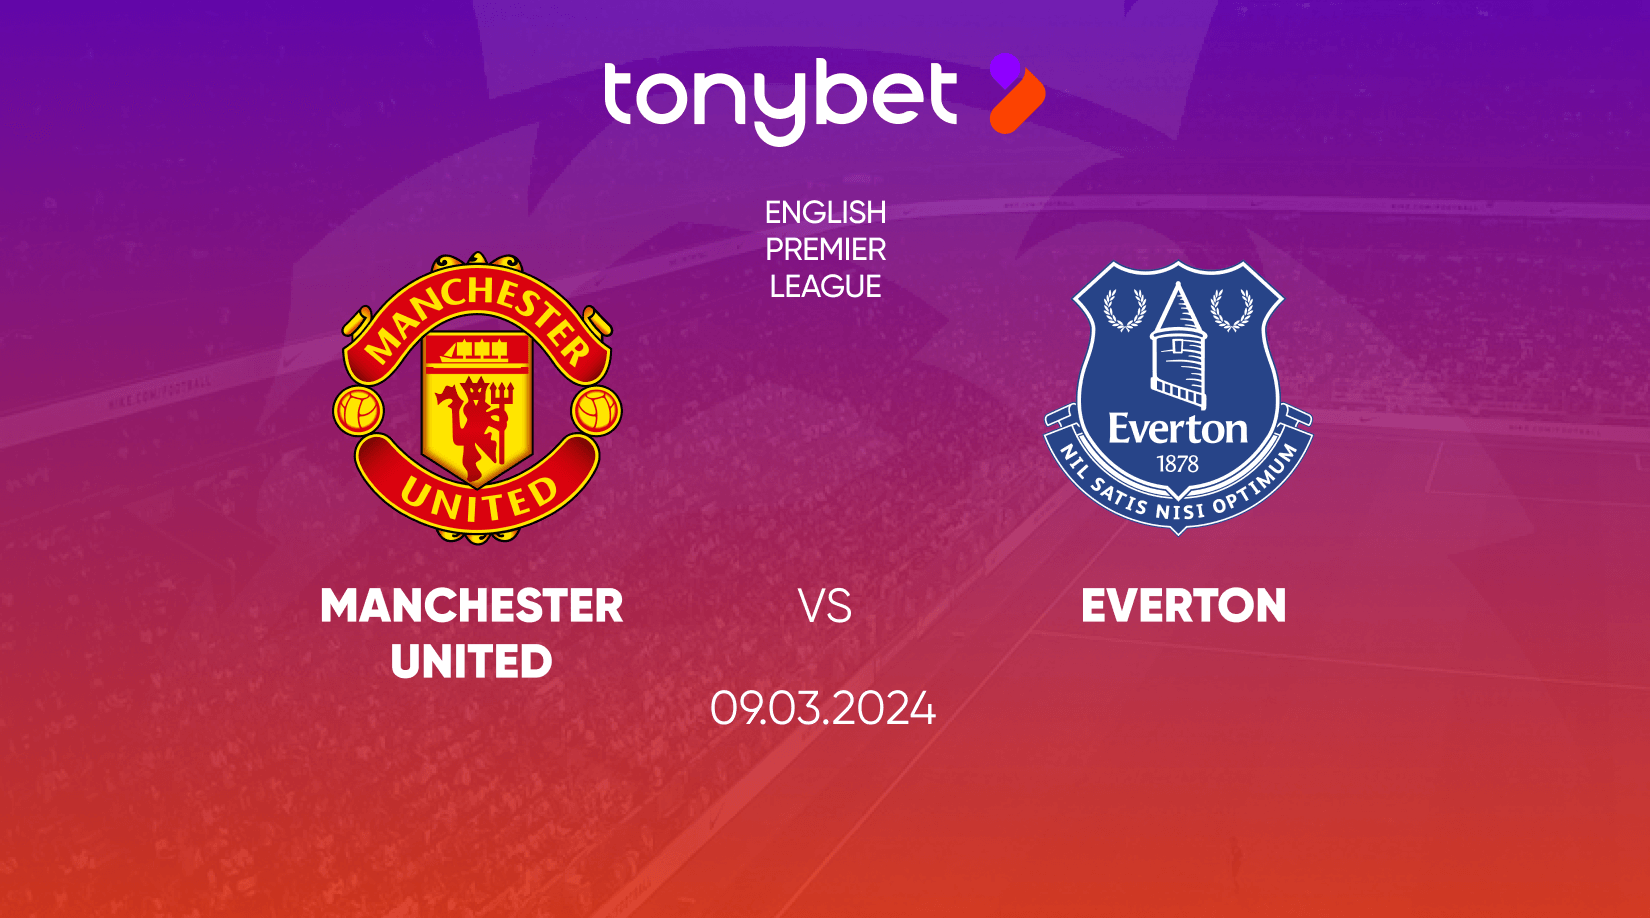 Manchester United vs Everton, Odds and Betting Tips 09/03/2024